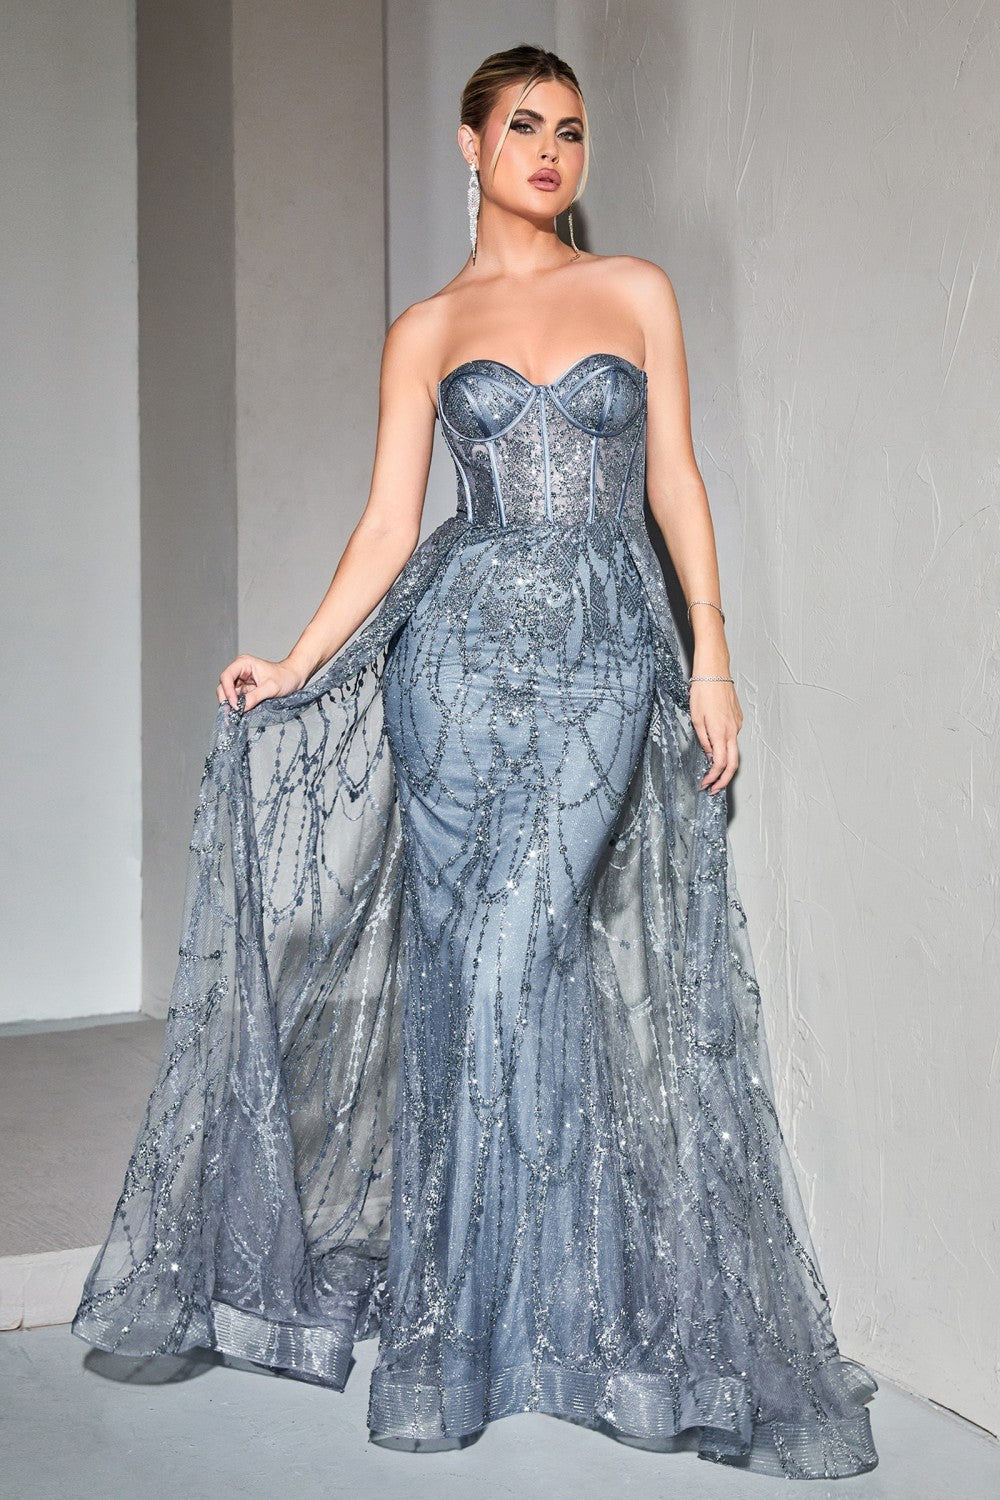 Smoky-blue Sweetheart Mermaid Corset Slit Gown CB095 - Women Evening Formal Gown - Special Occasion